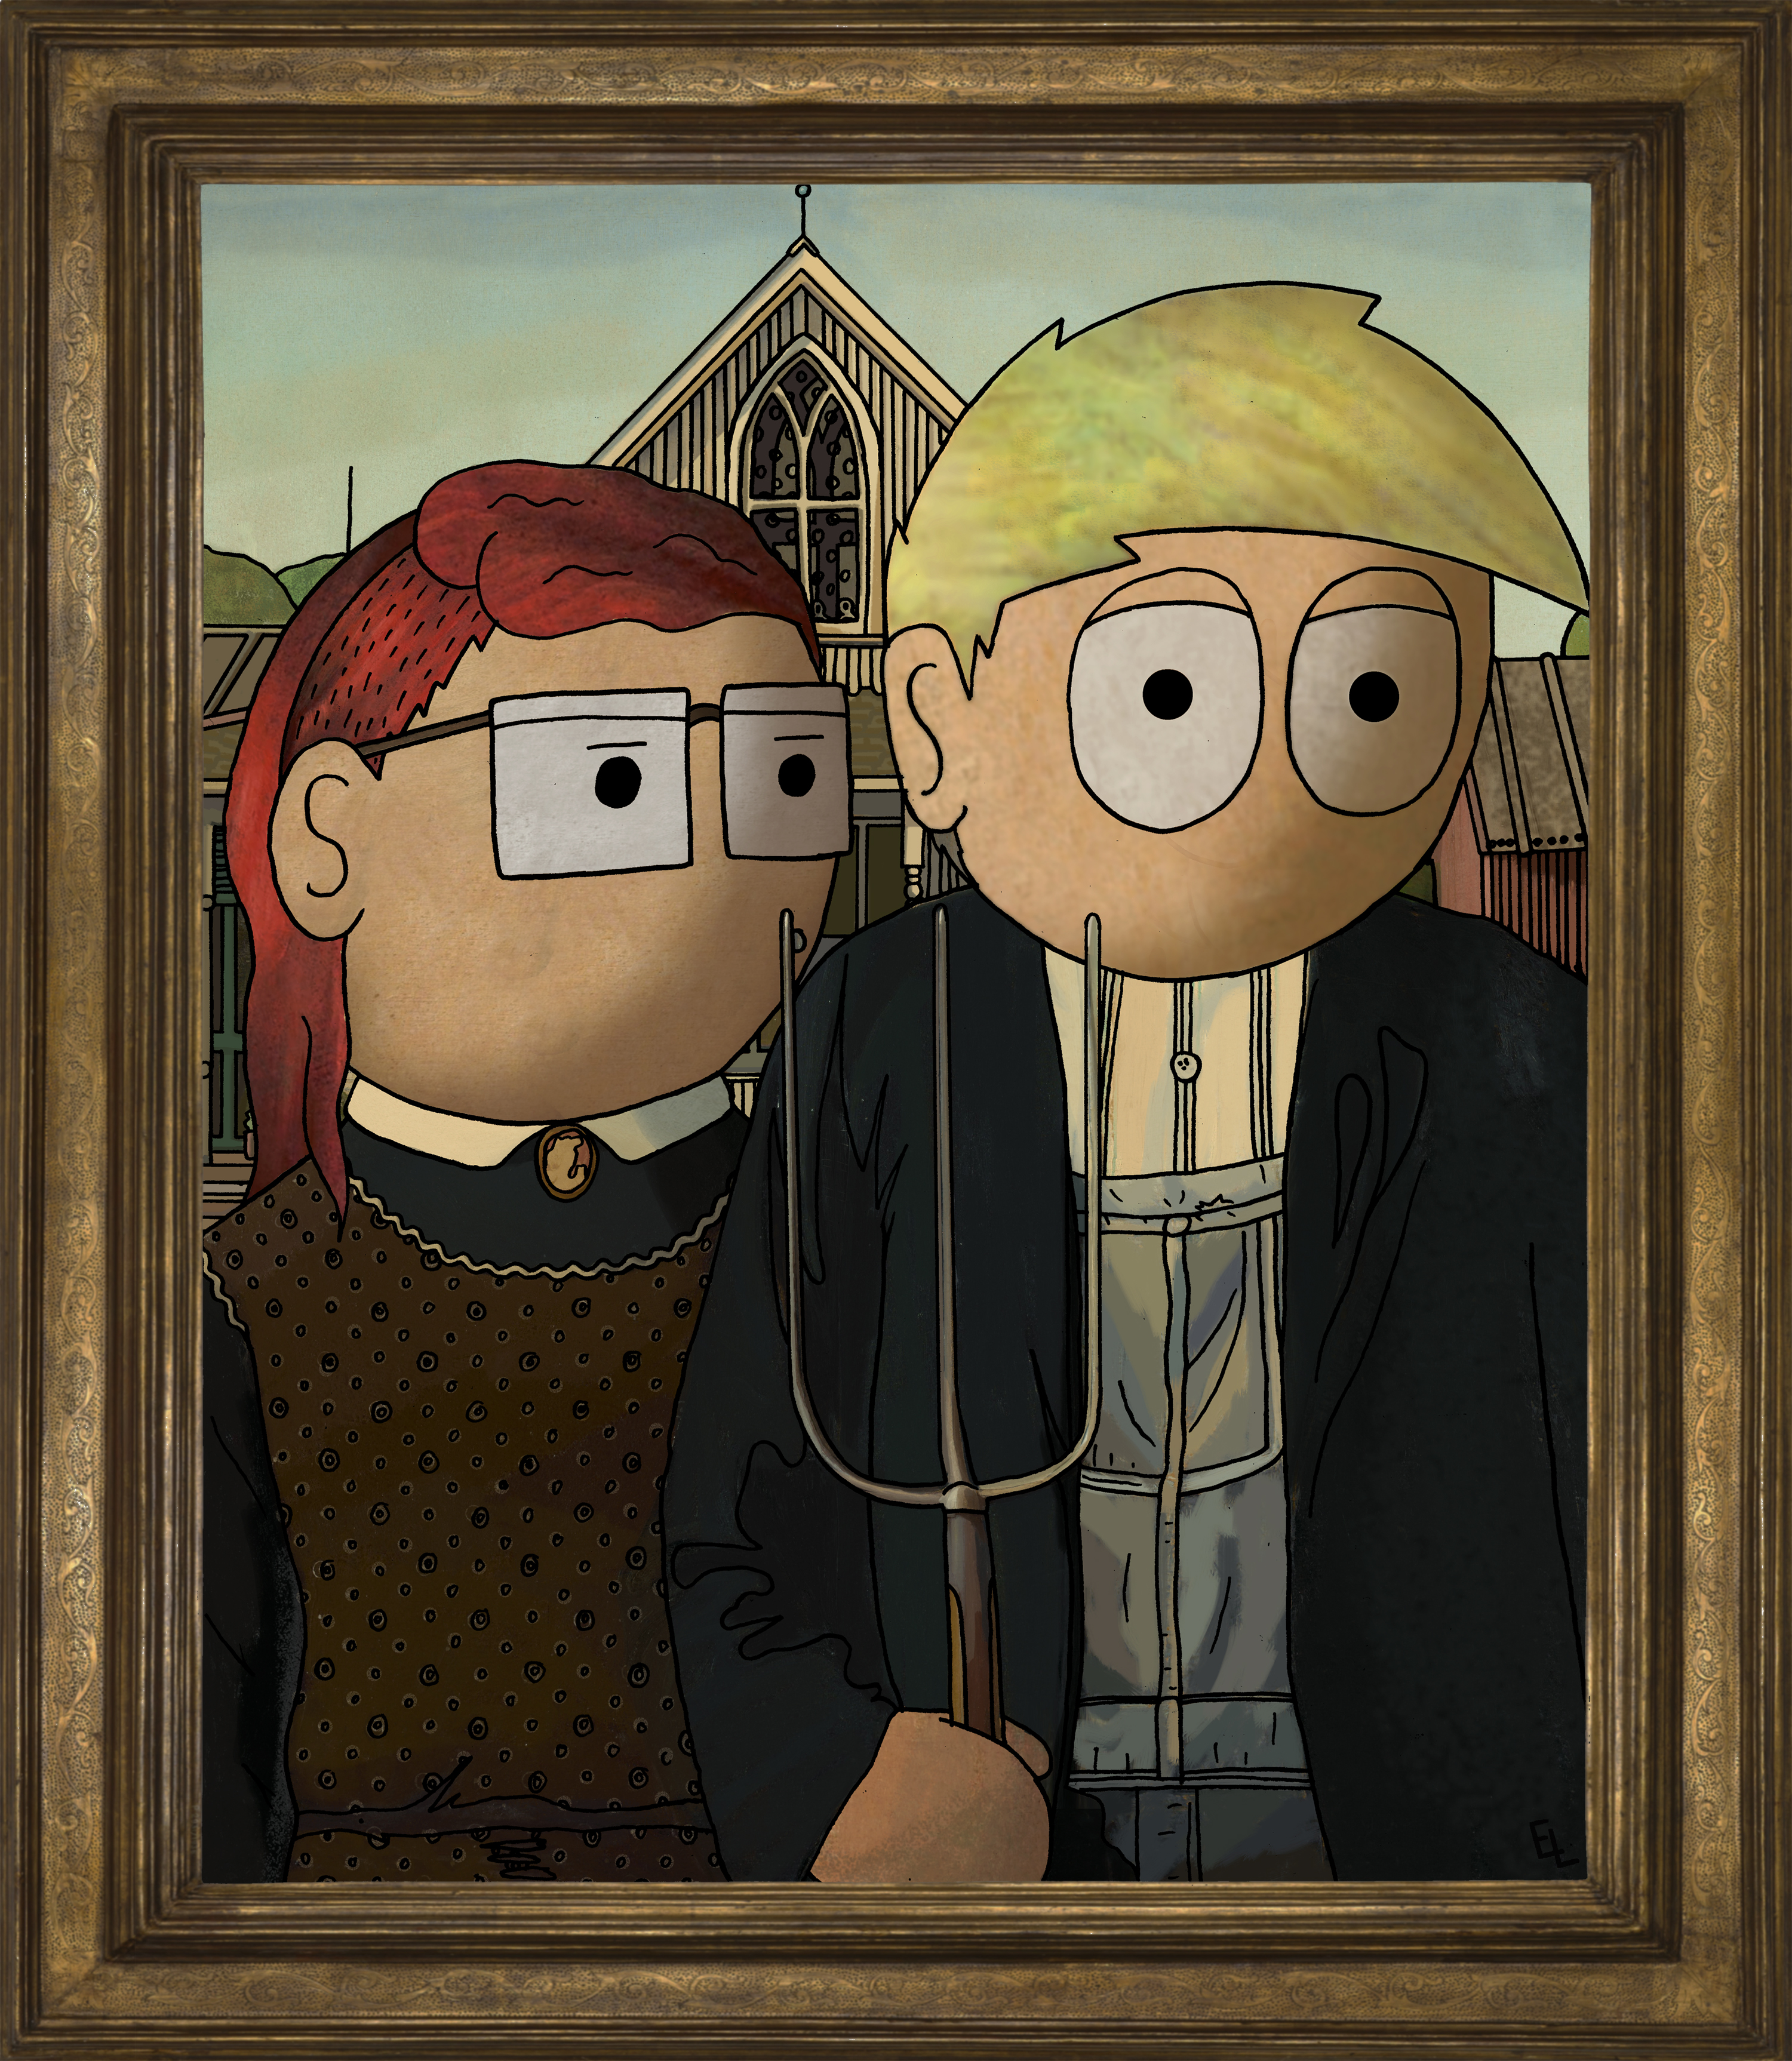 Fun Fact: Grant Wood's "American Gothic" is the most parodied classic American work of art.